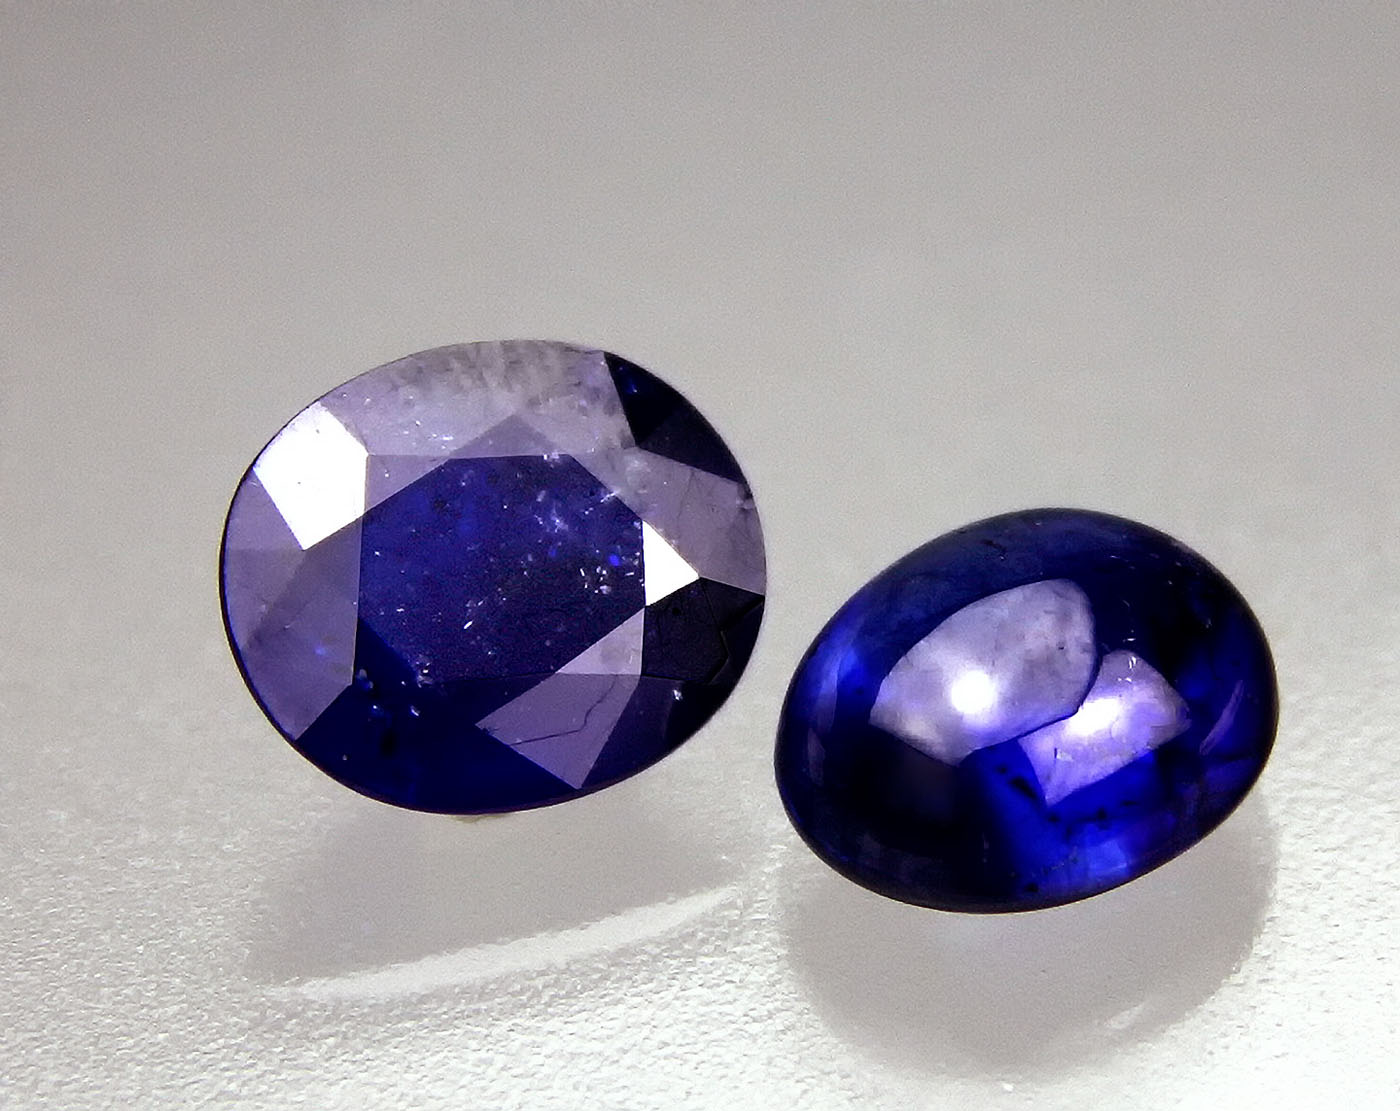 Figure 1. Two blue stones weighing 7.57 ct (left) and 6.62 ct (right) submitted to GIT for testing in May 2012. Photo: Warinthip Krajae-Jan